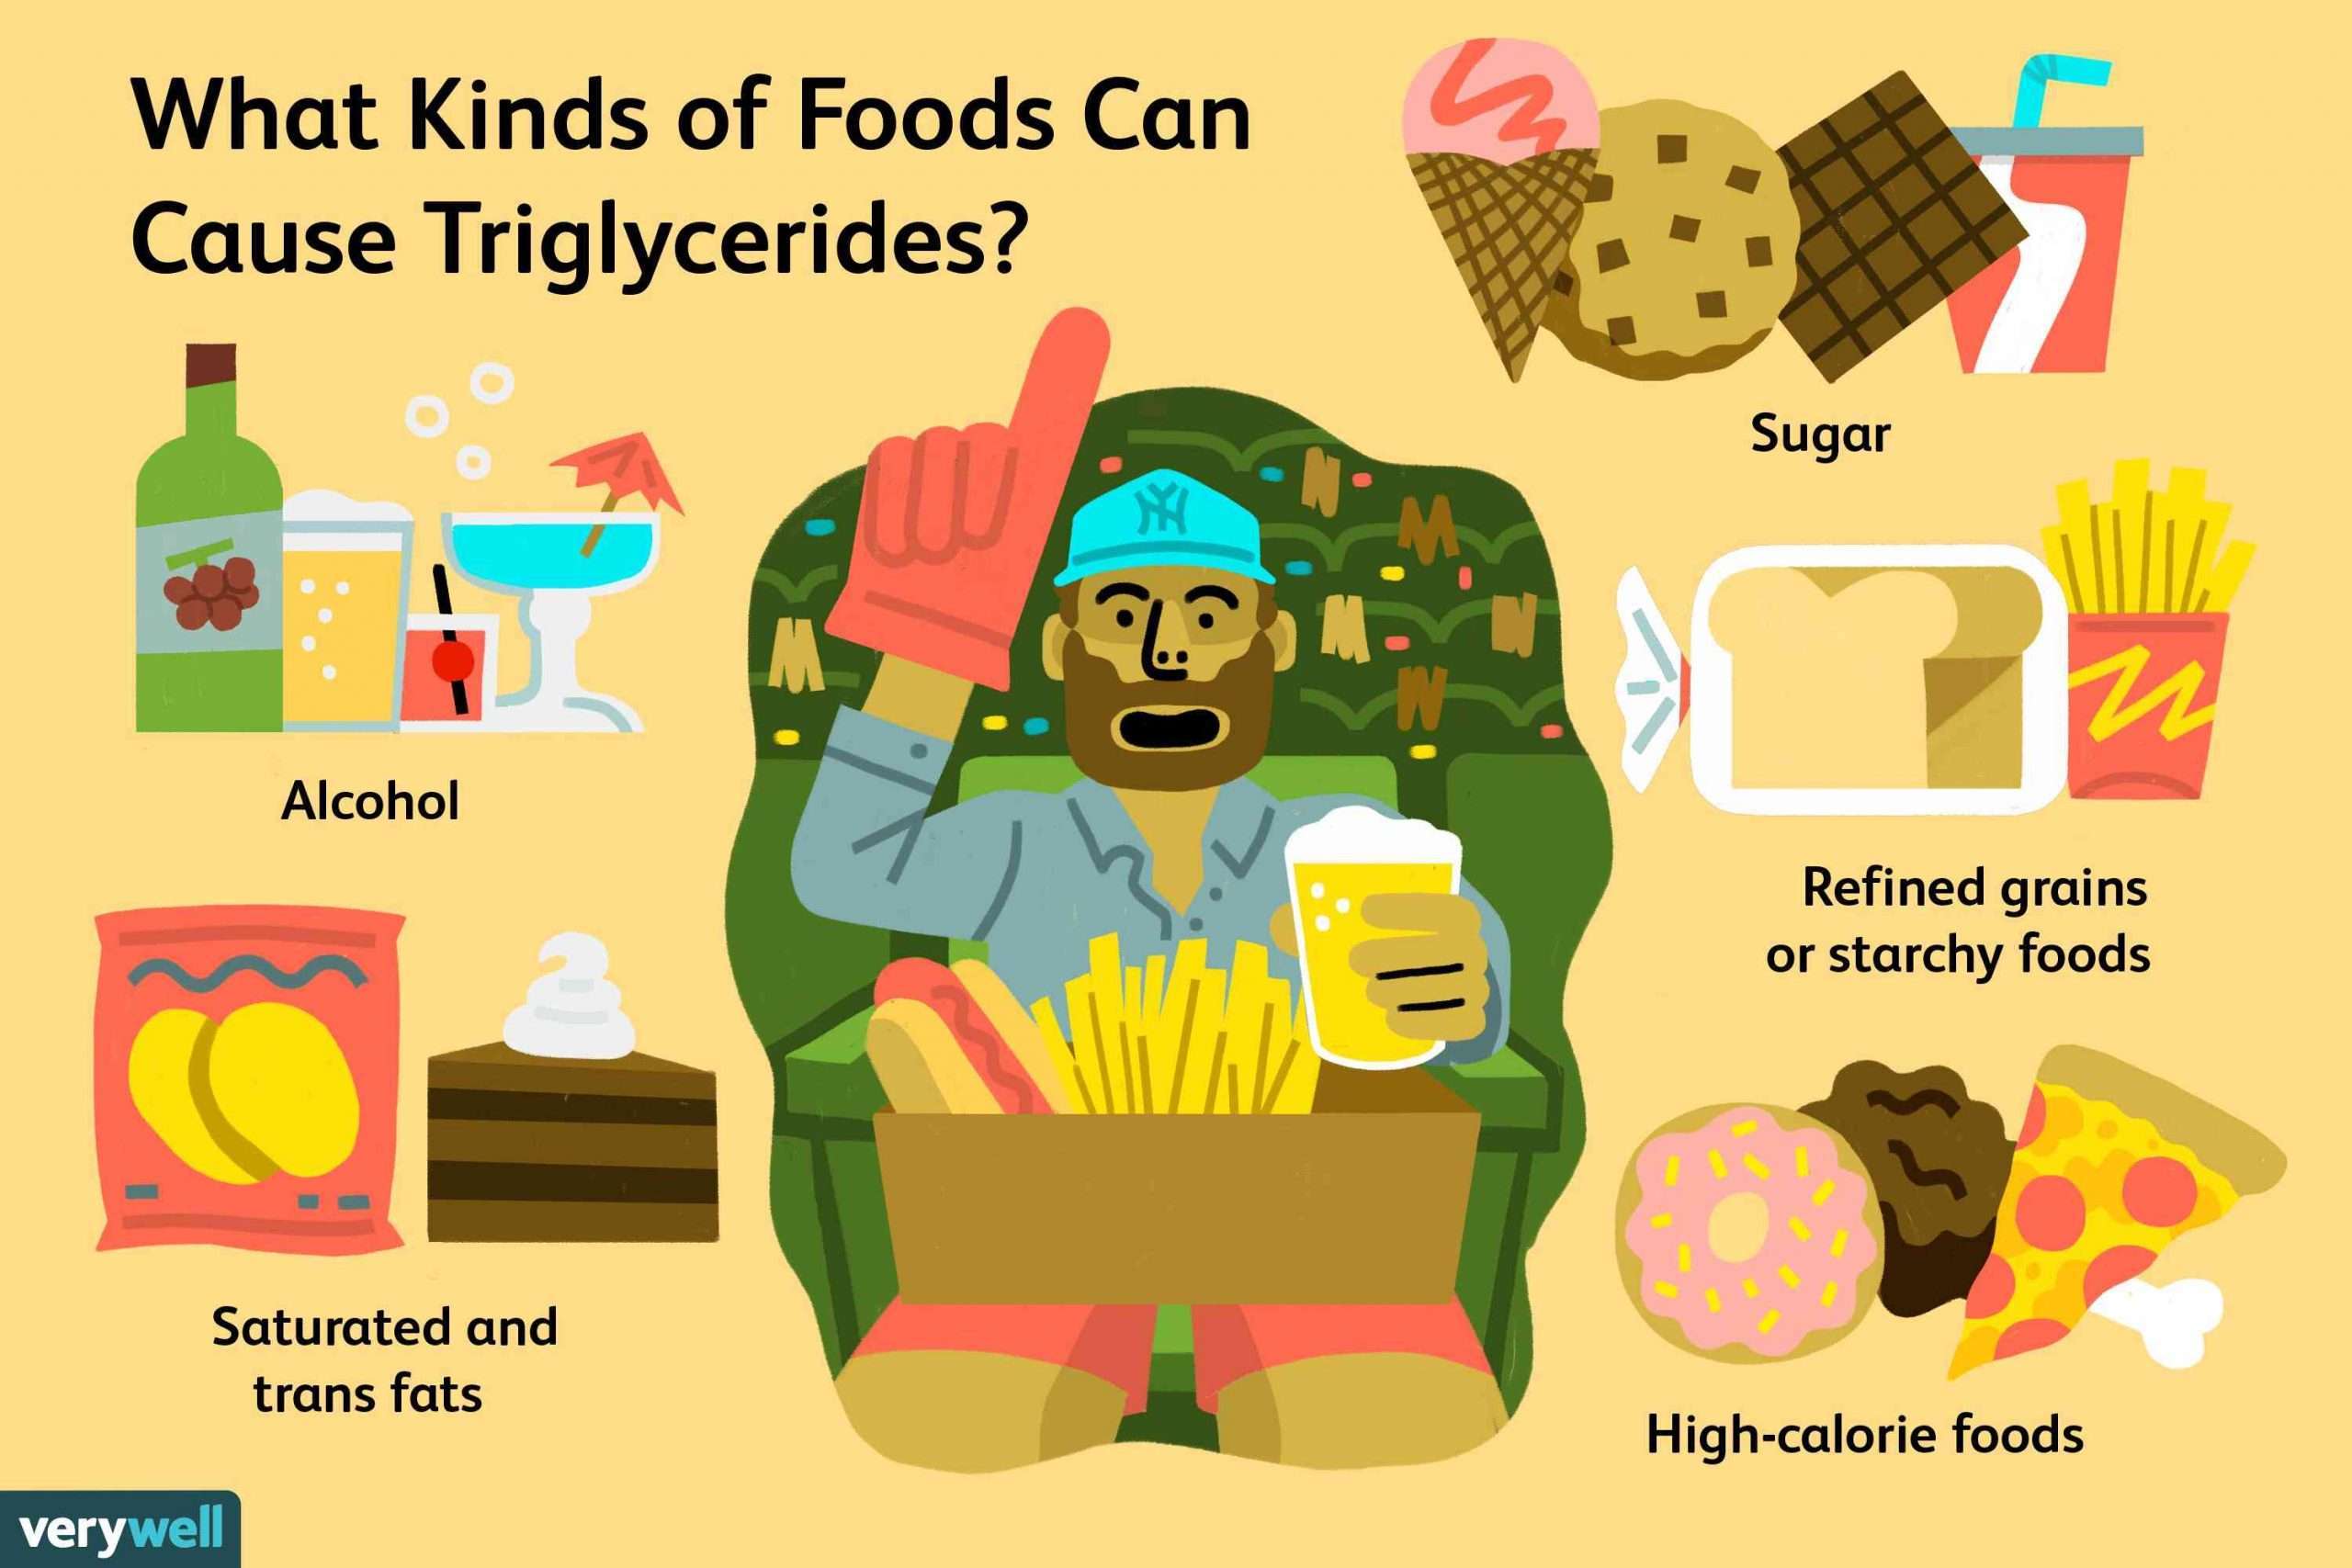 What Food Types Cause High Triglycerides?